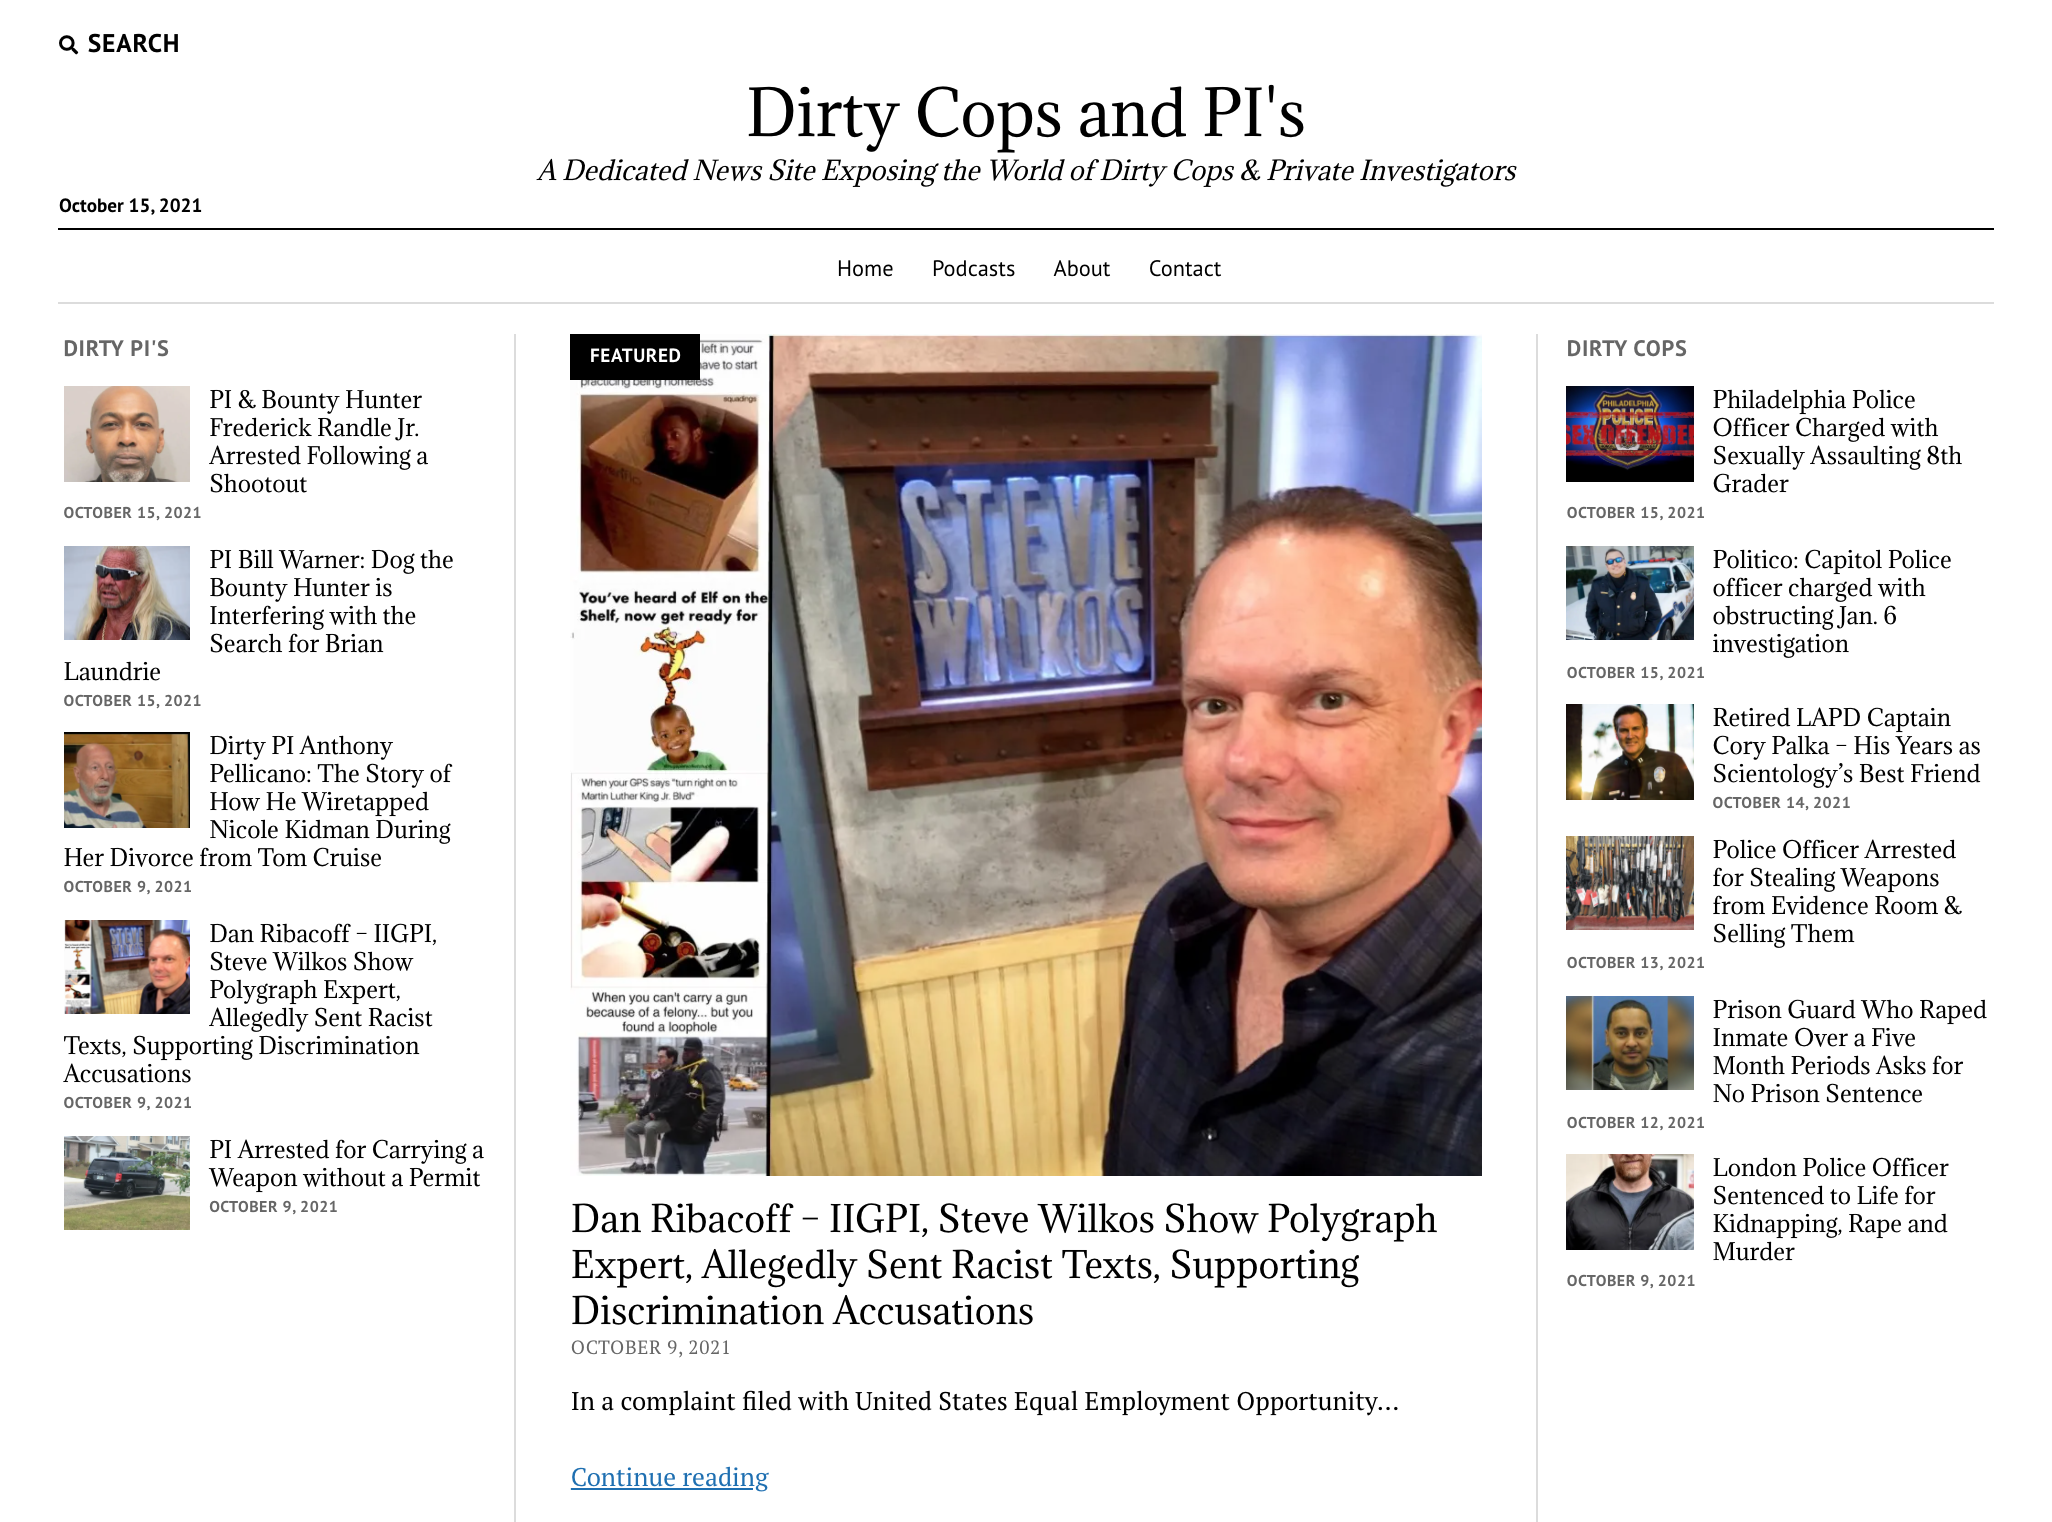 Lead Article at DirtyCopsandPIs.com, News Website Featuring Abuse-of-Power Stories Launching Today